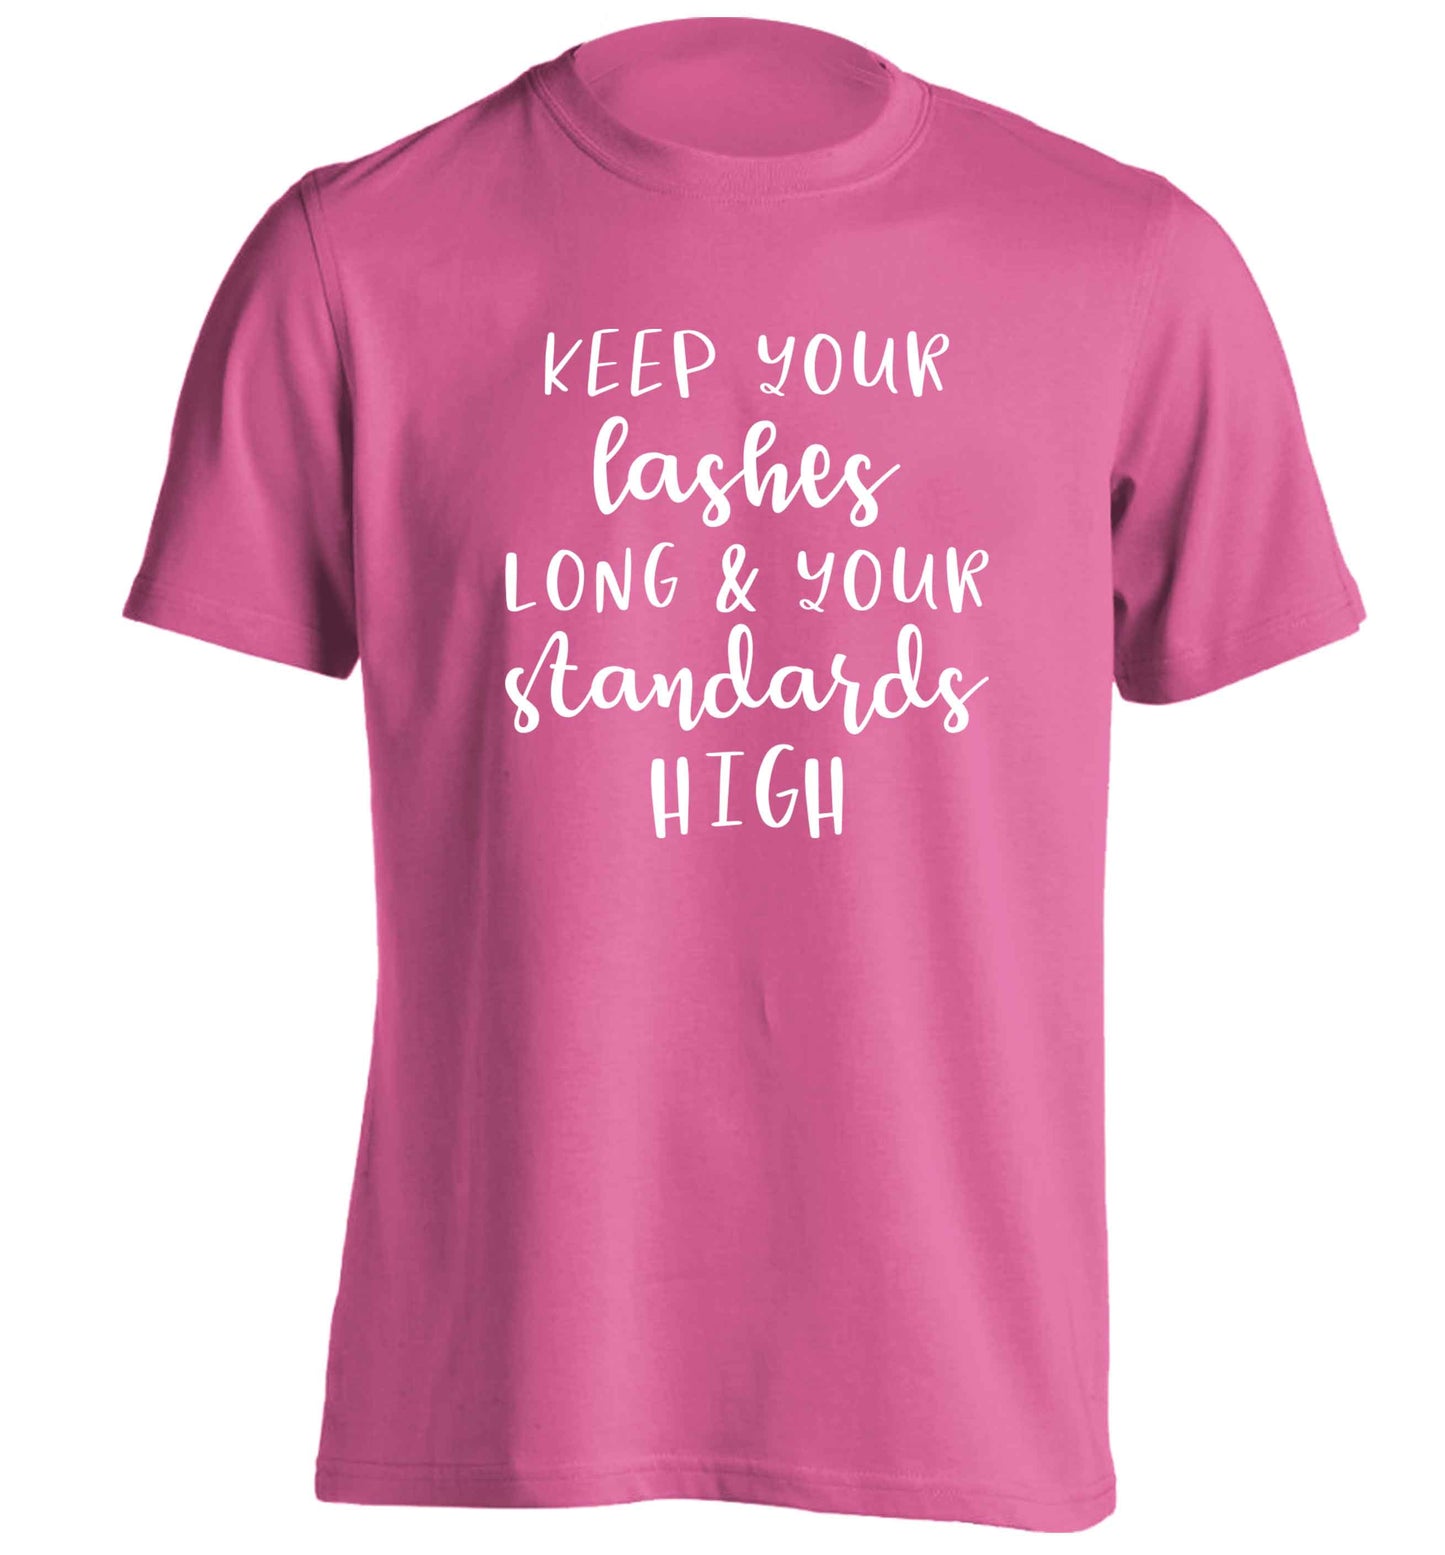 Keep your lashes long and your standards high adults unisex pink Tshirt 2XL